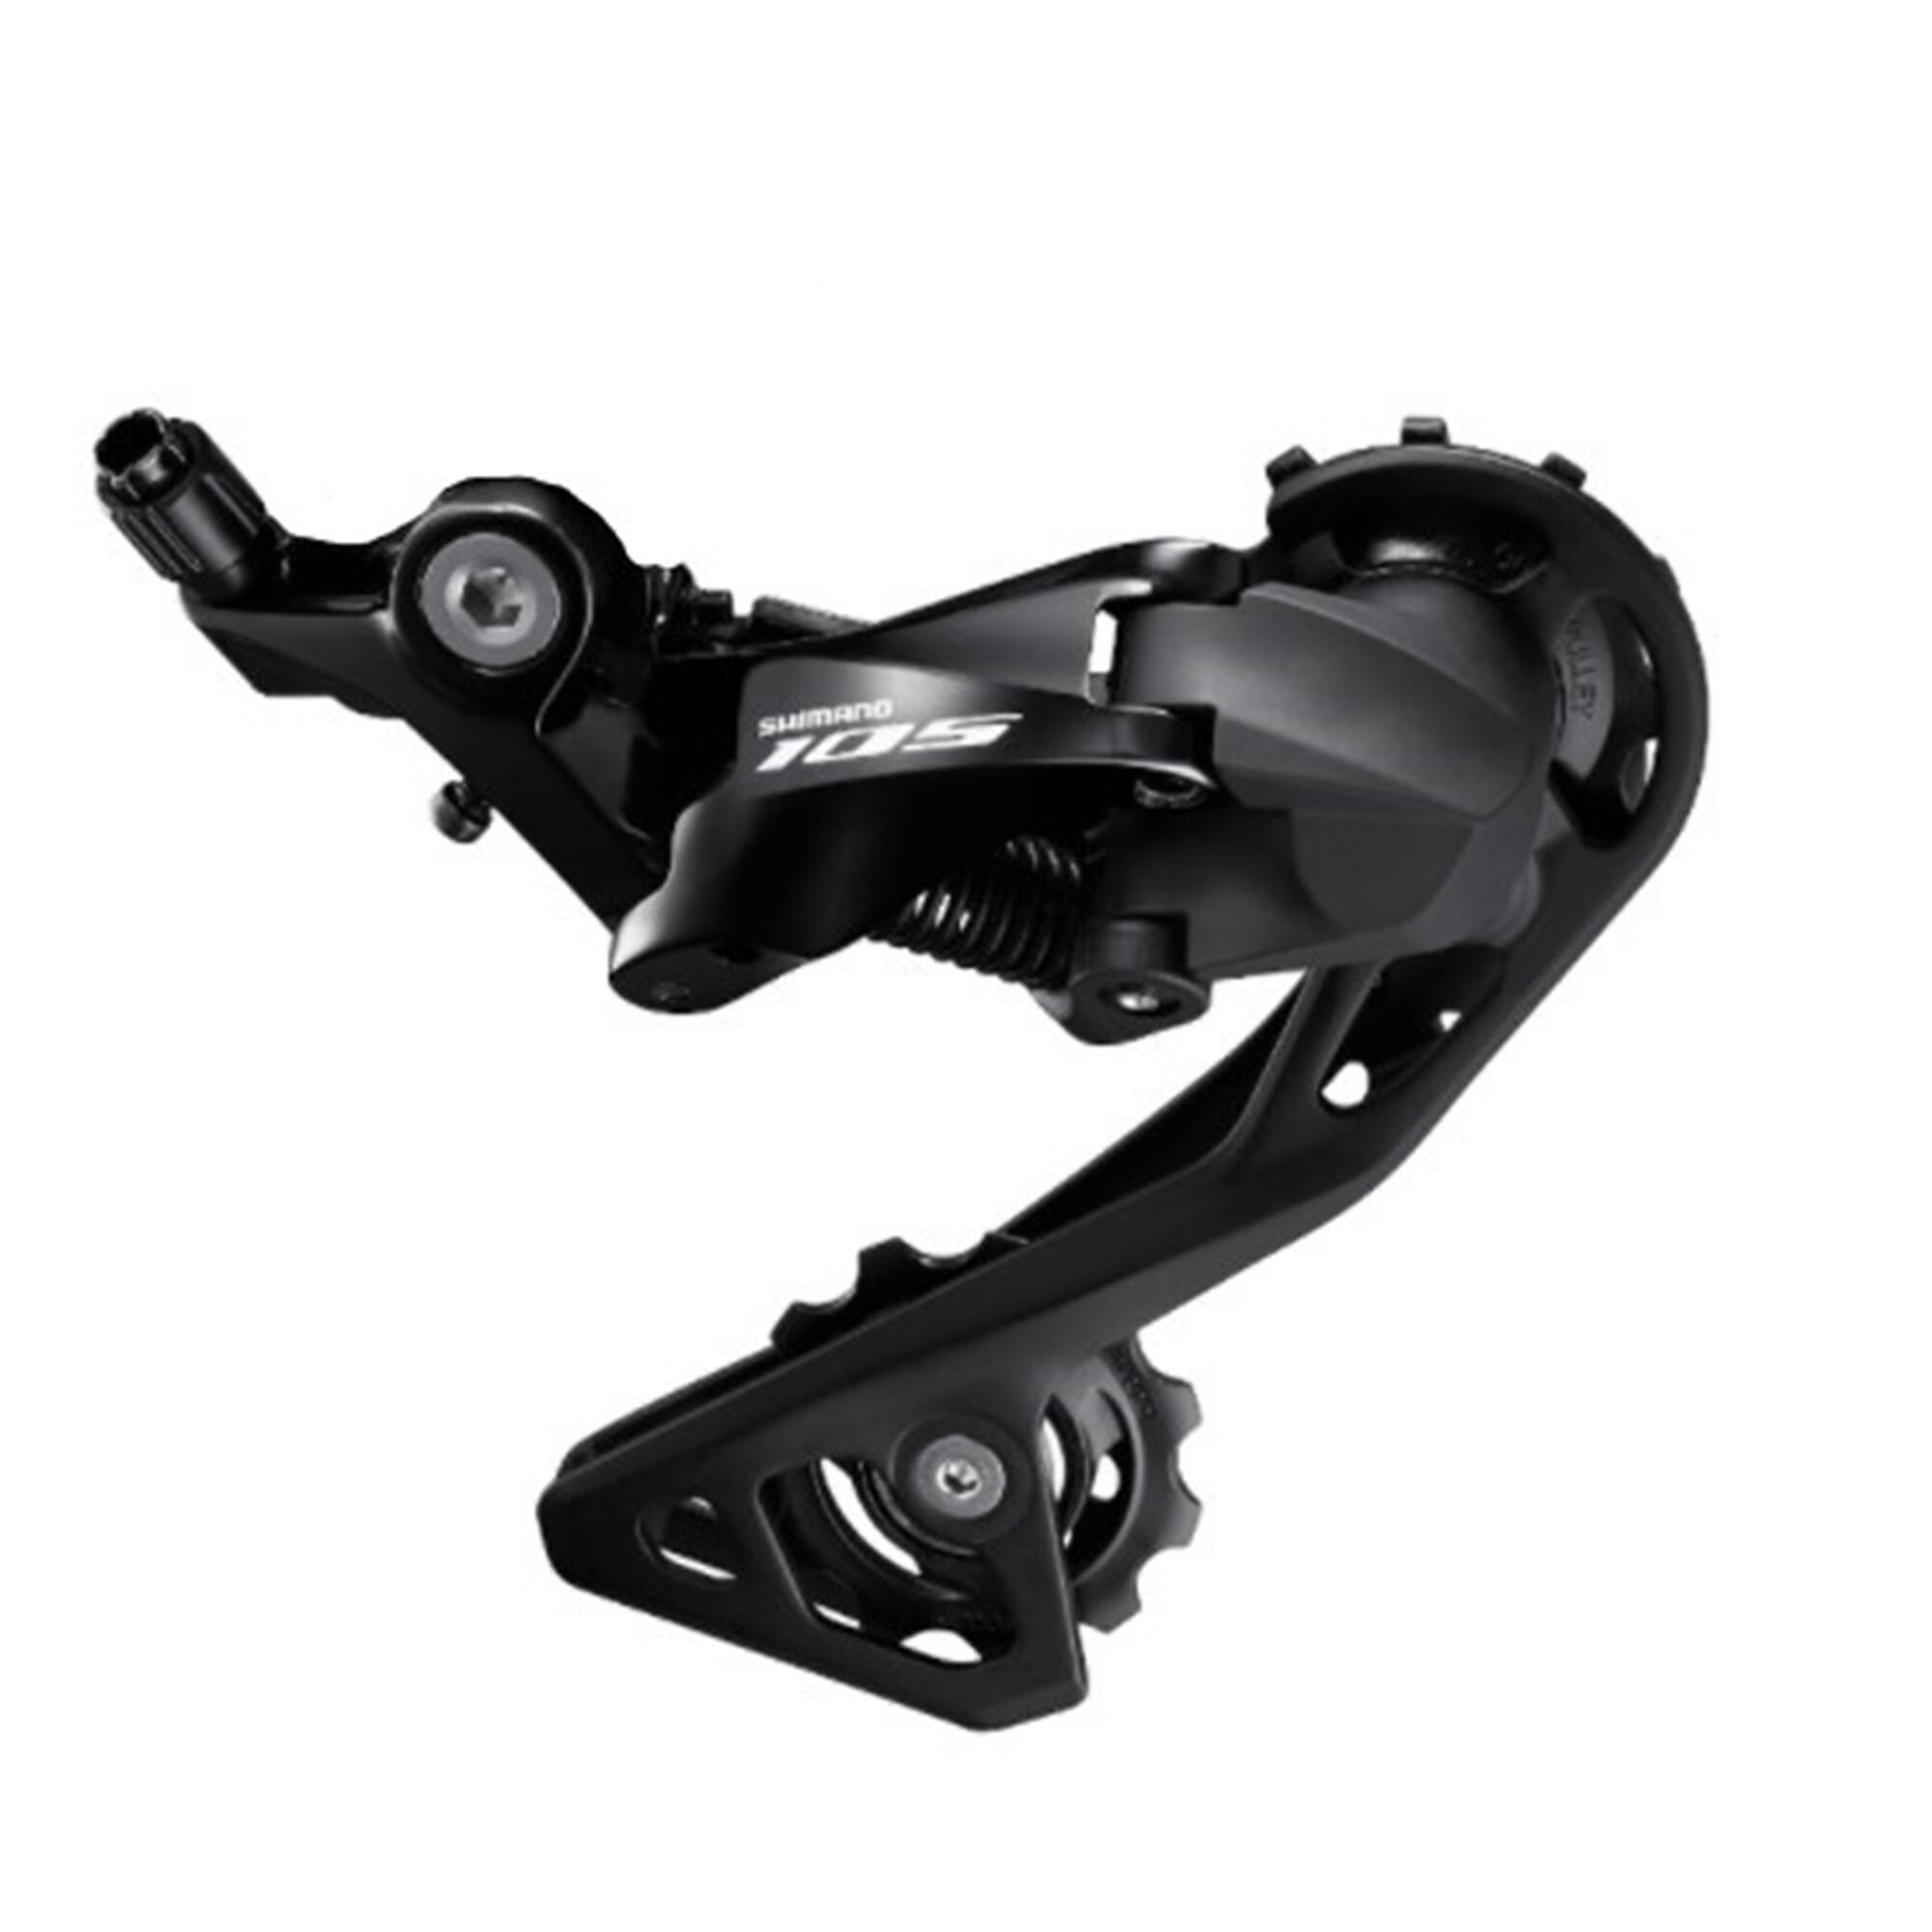  Schimbător spate SHIMANO 105 RD-R7000-GS 